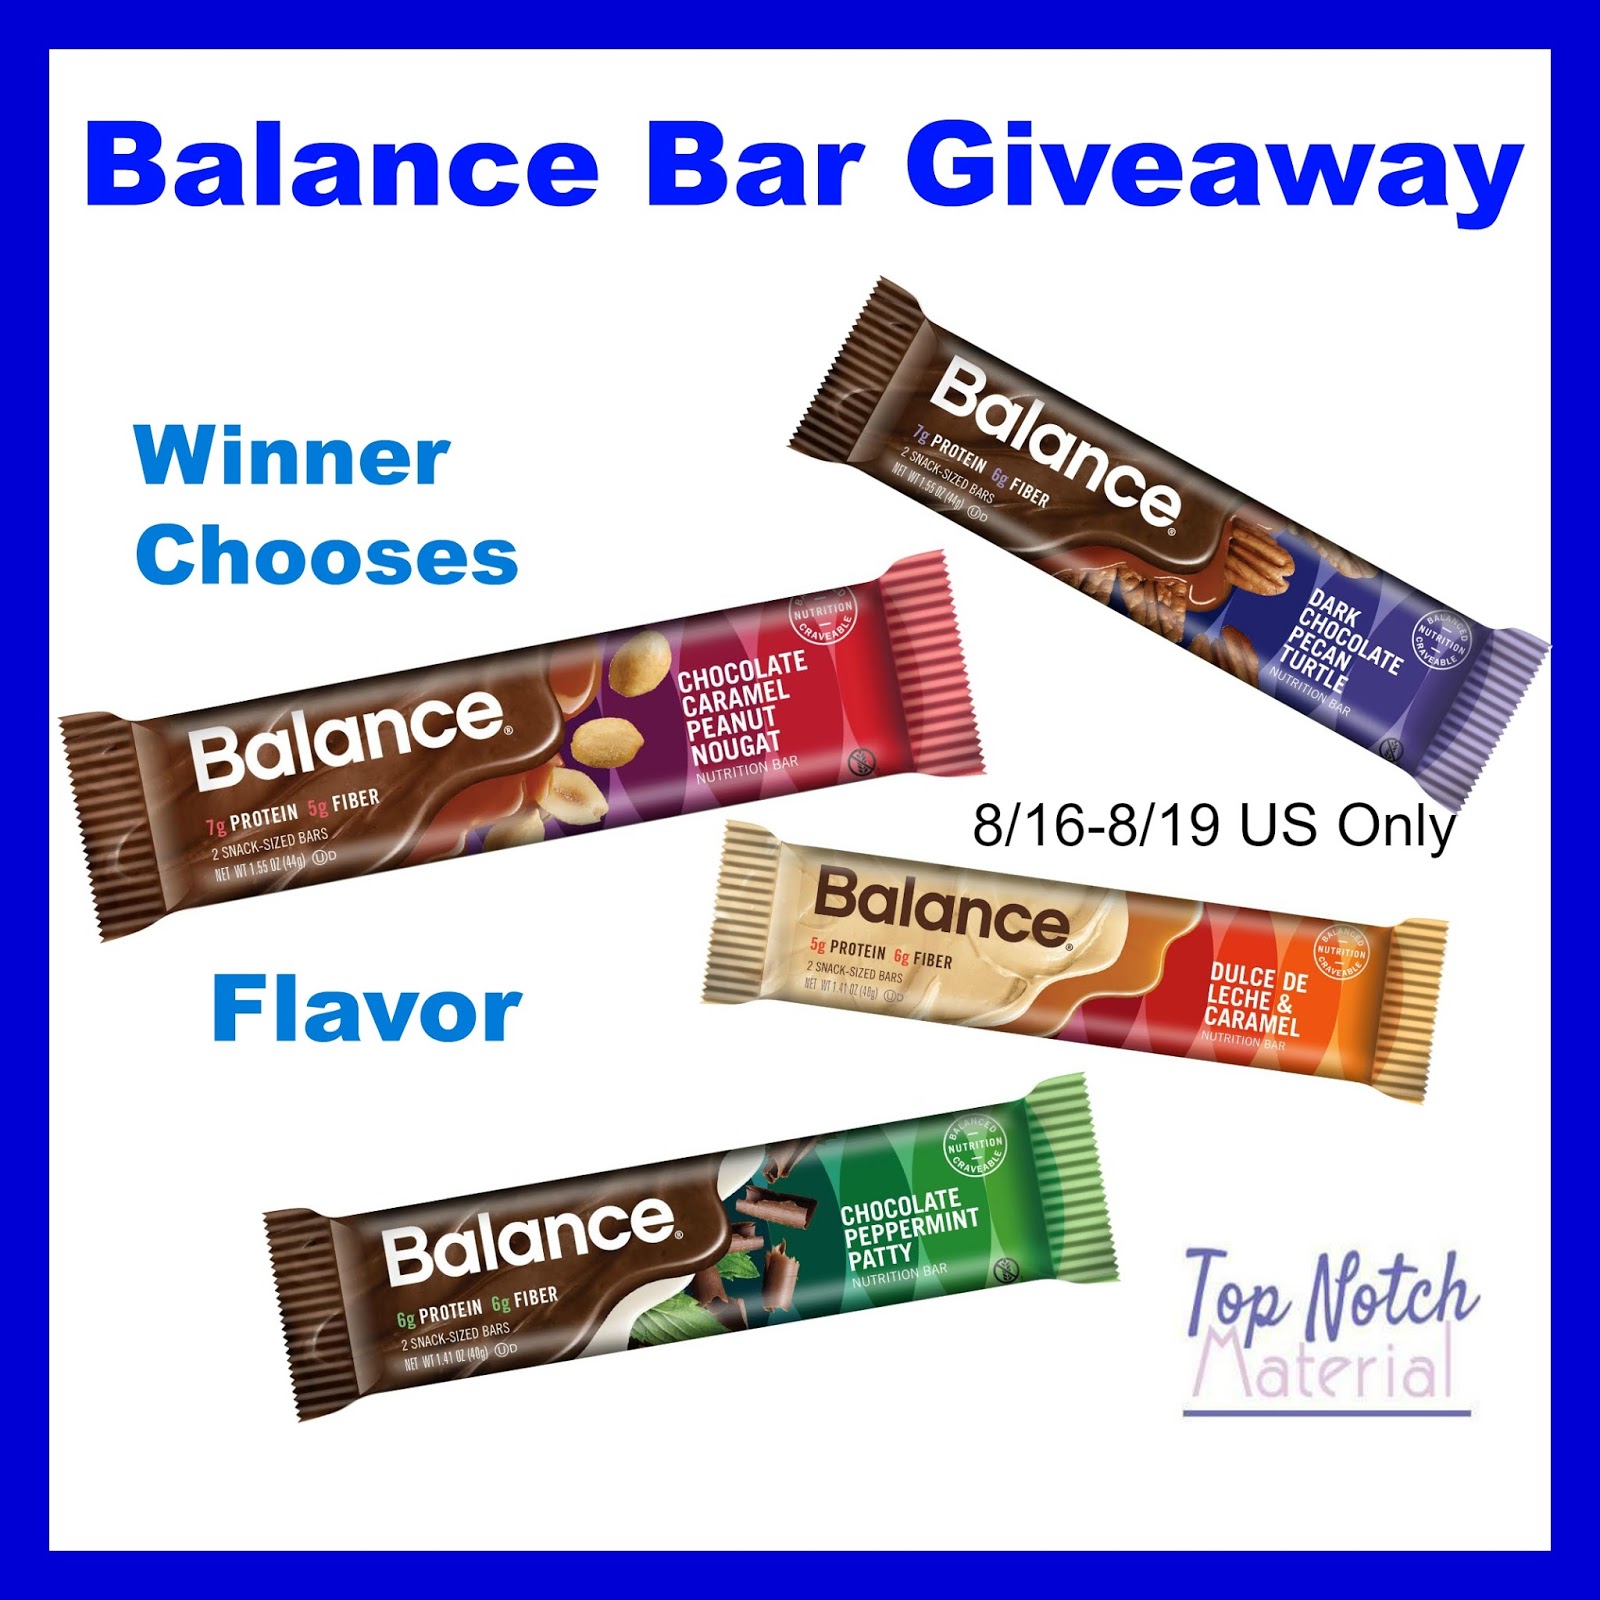 Top Notch Material: #CraveFreely with Balance Bar new ...